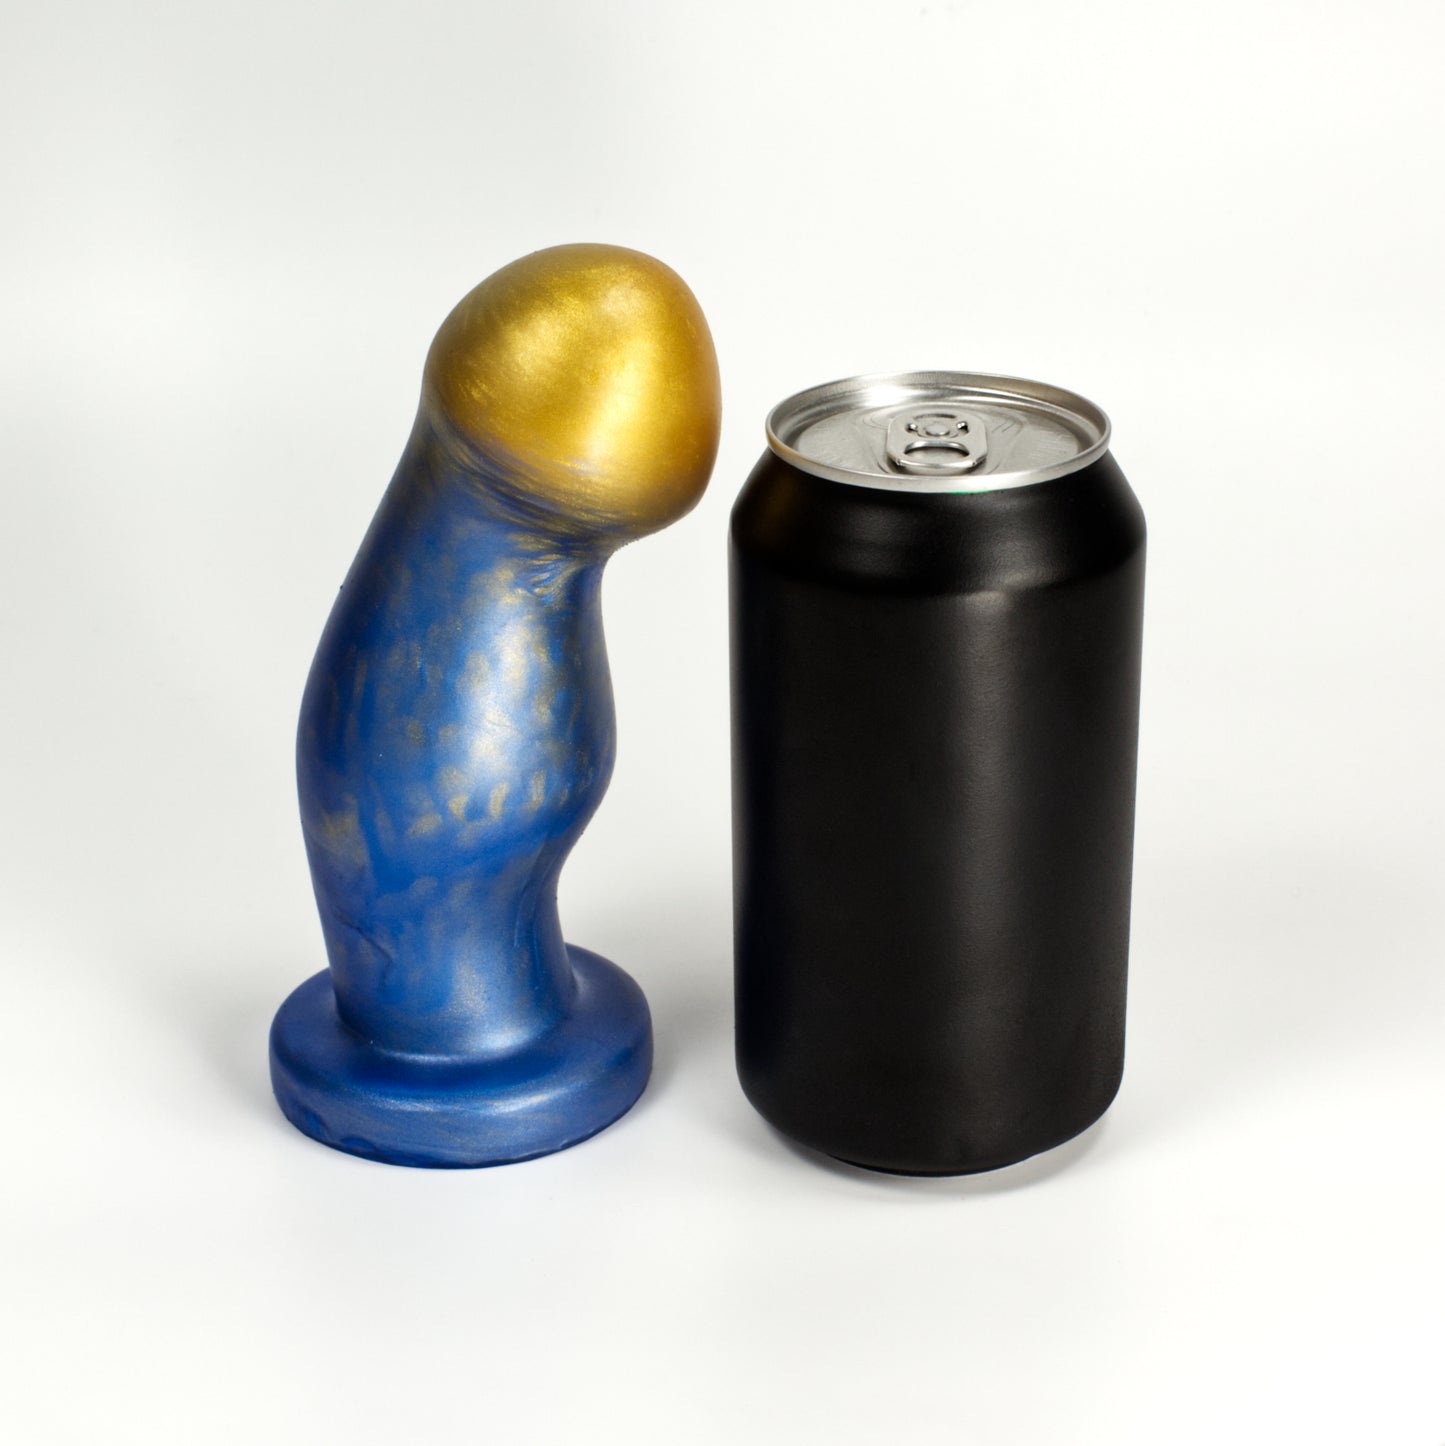 Side view of the Ally Medium next to a standard soda can, showing that the toy is a little taller than the can and three quarters as wide at the middle bump.